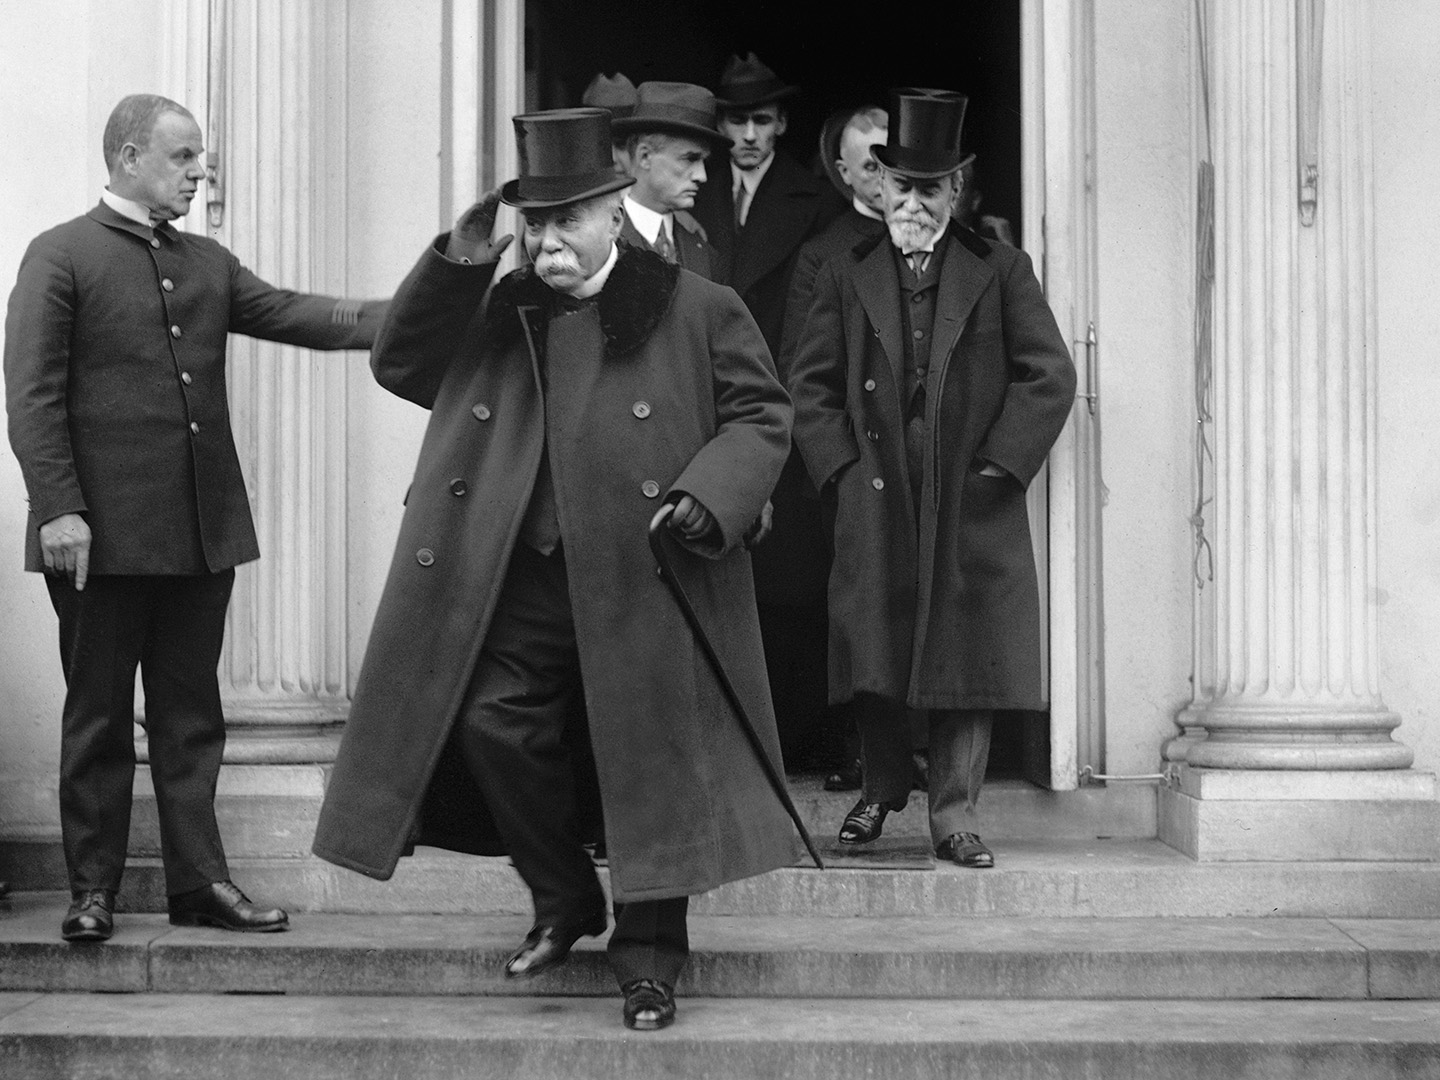 Georges Clemenceau: French politician, physician, and journalist who was Prime Minister of France during WWI.